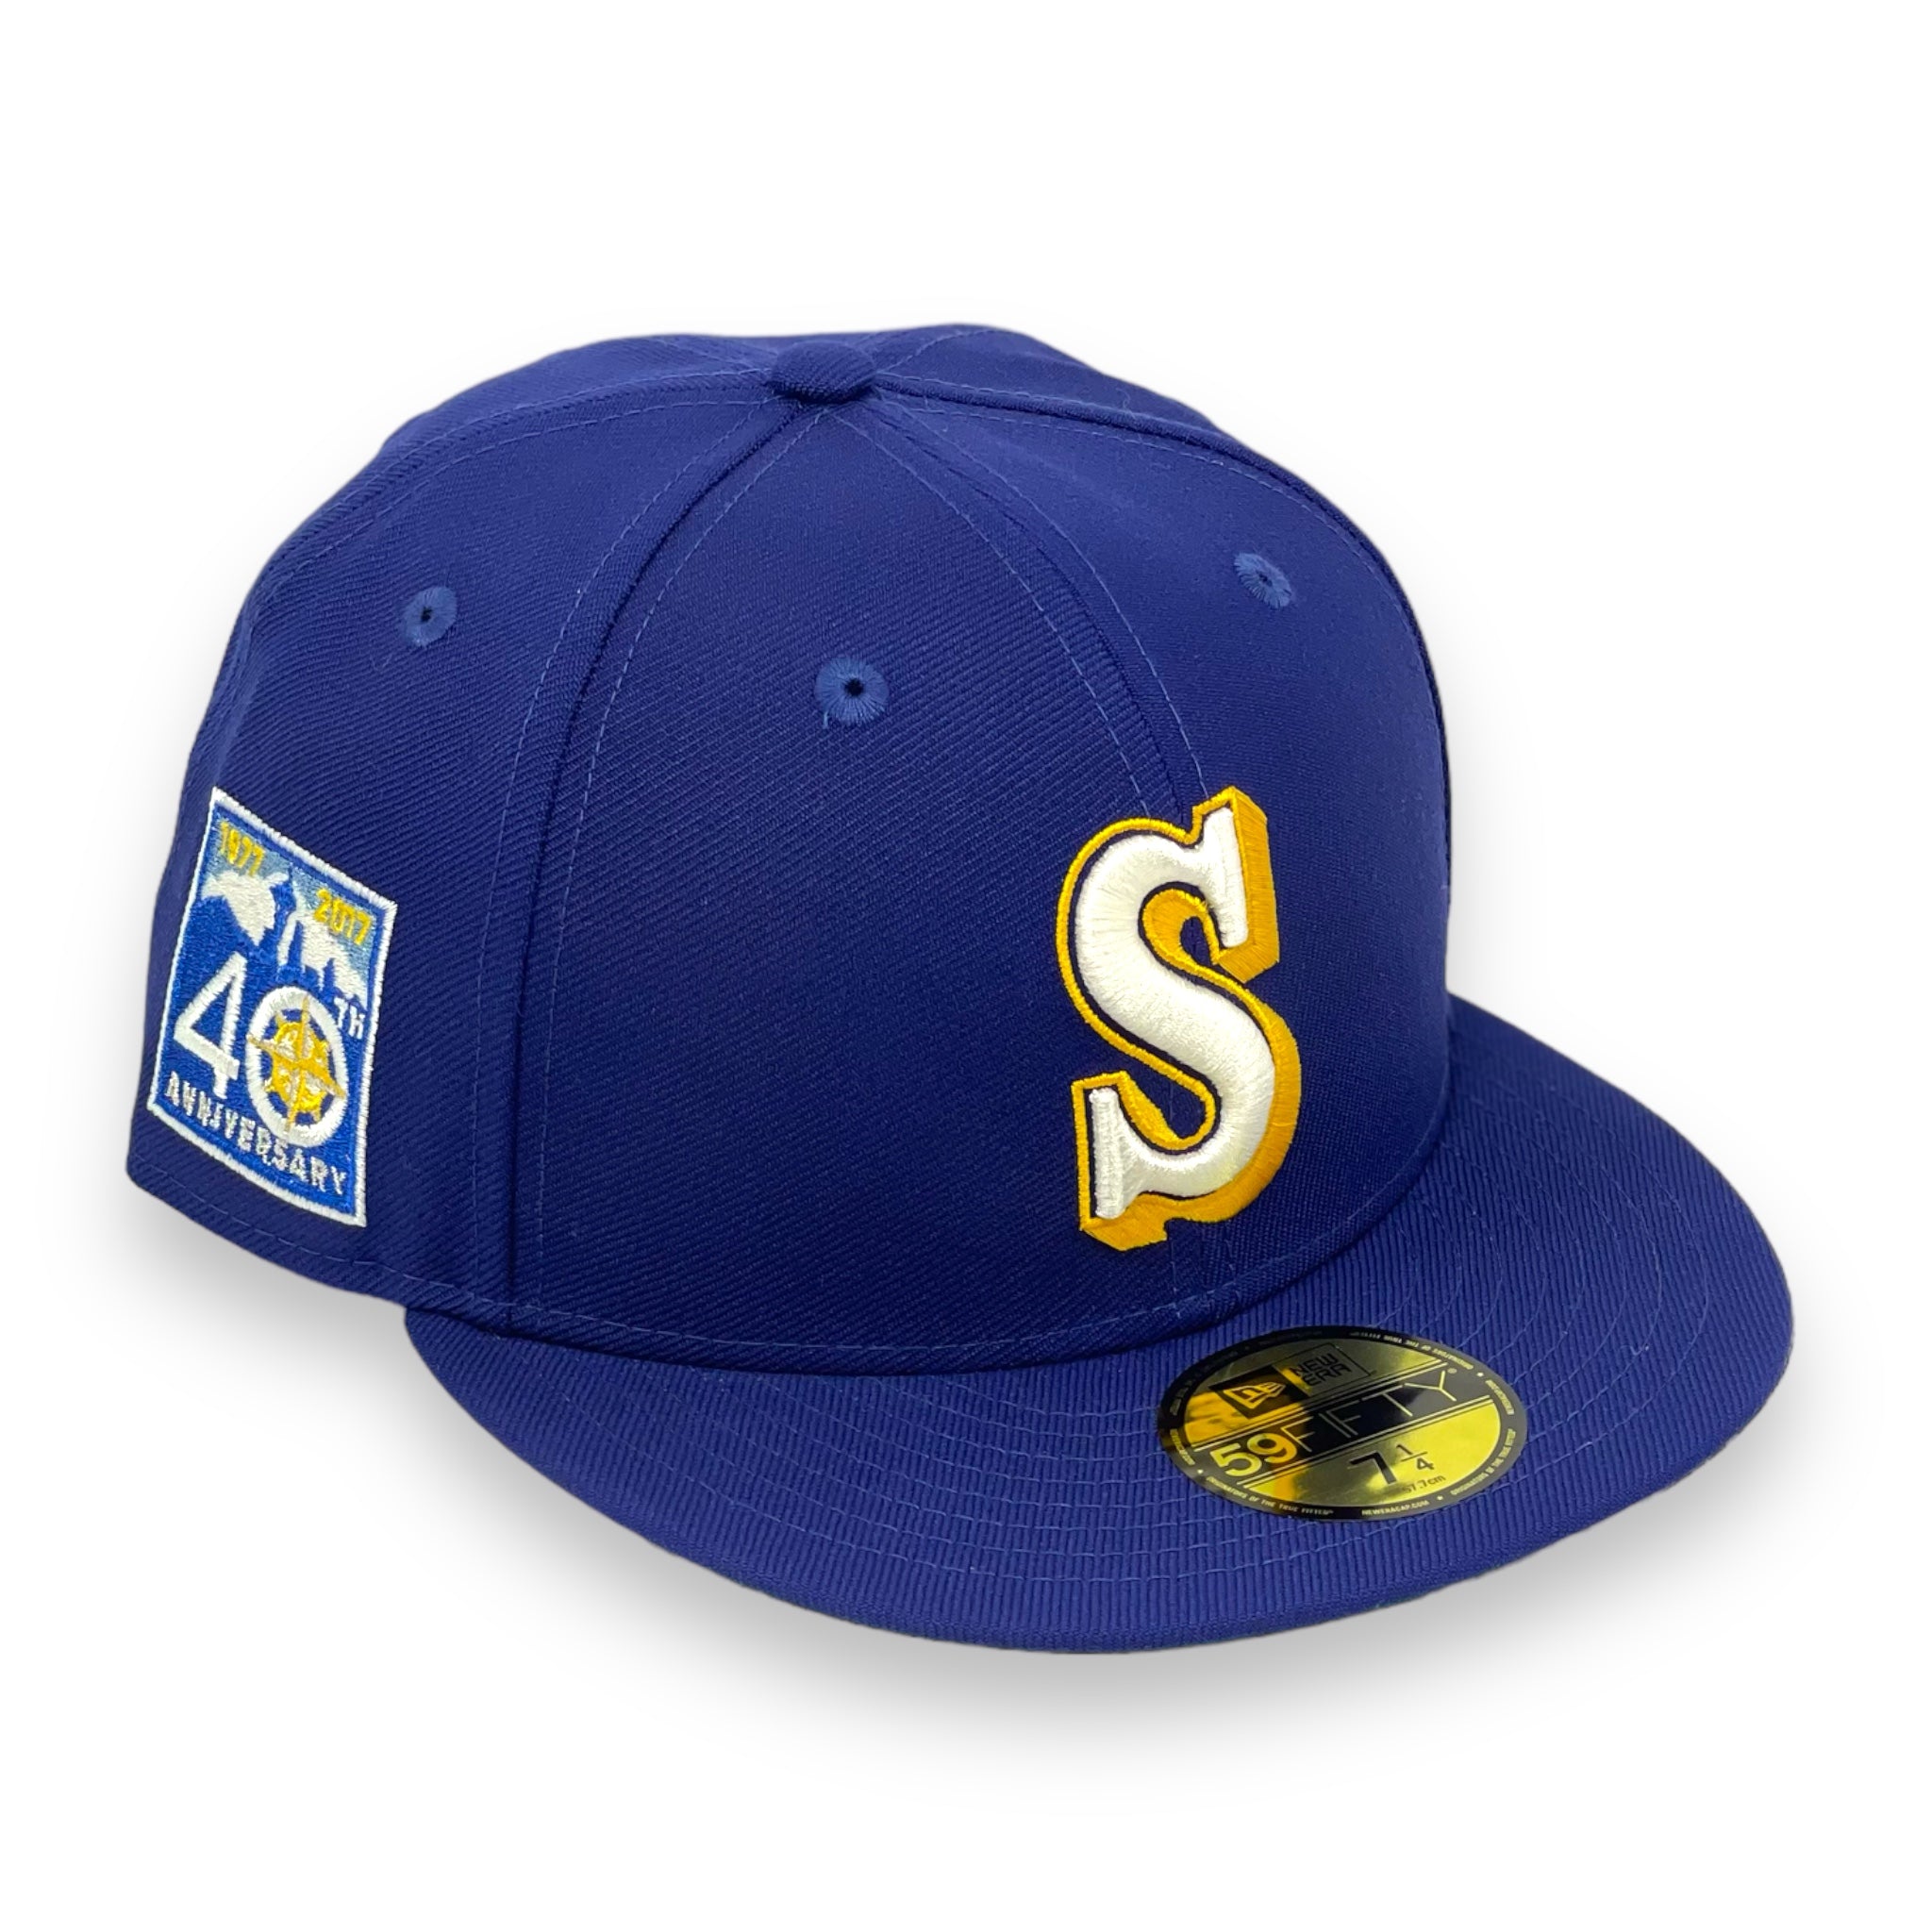 SEATTLE MARINERS (DK-ROYAL) (40TH ANNIVERSARY) NEW ERA 59FIFTY FITTED (GREEN UNDER VISOR)